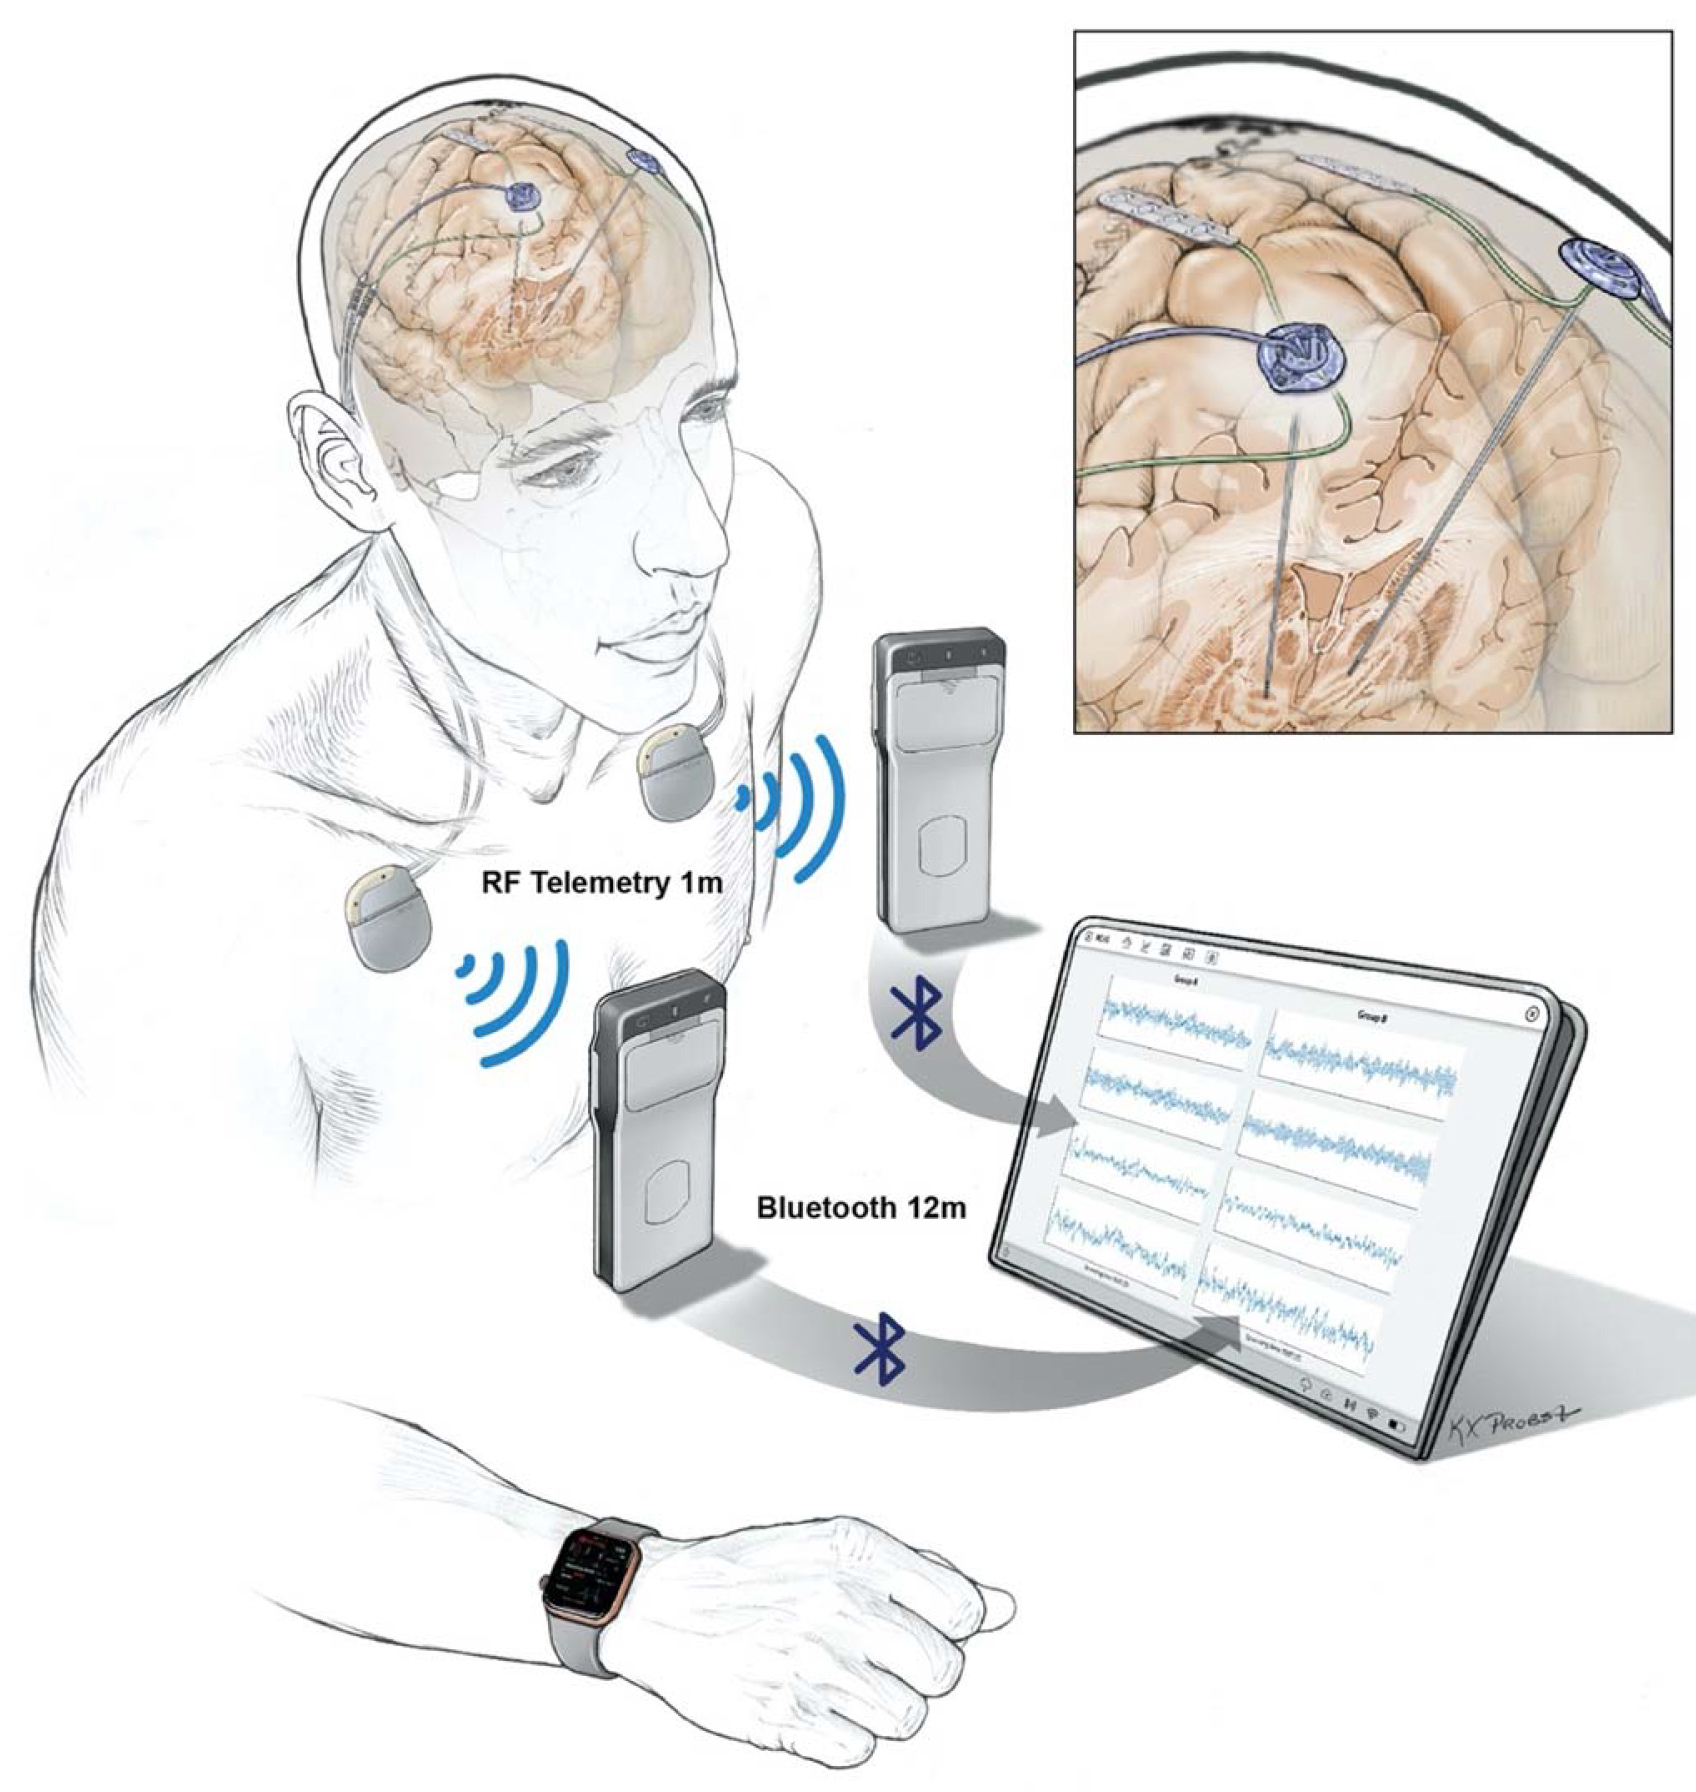 Implanted electrodes stream recorded data to a pocket-sized device worn by a patient